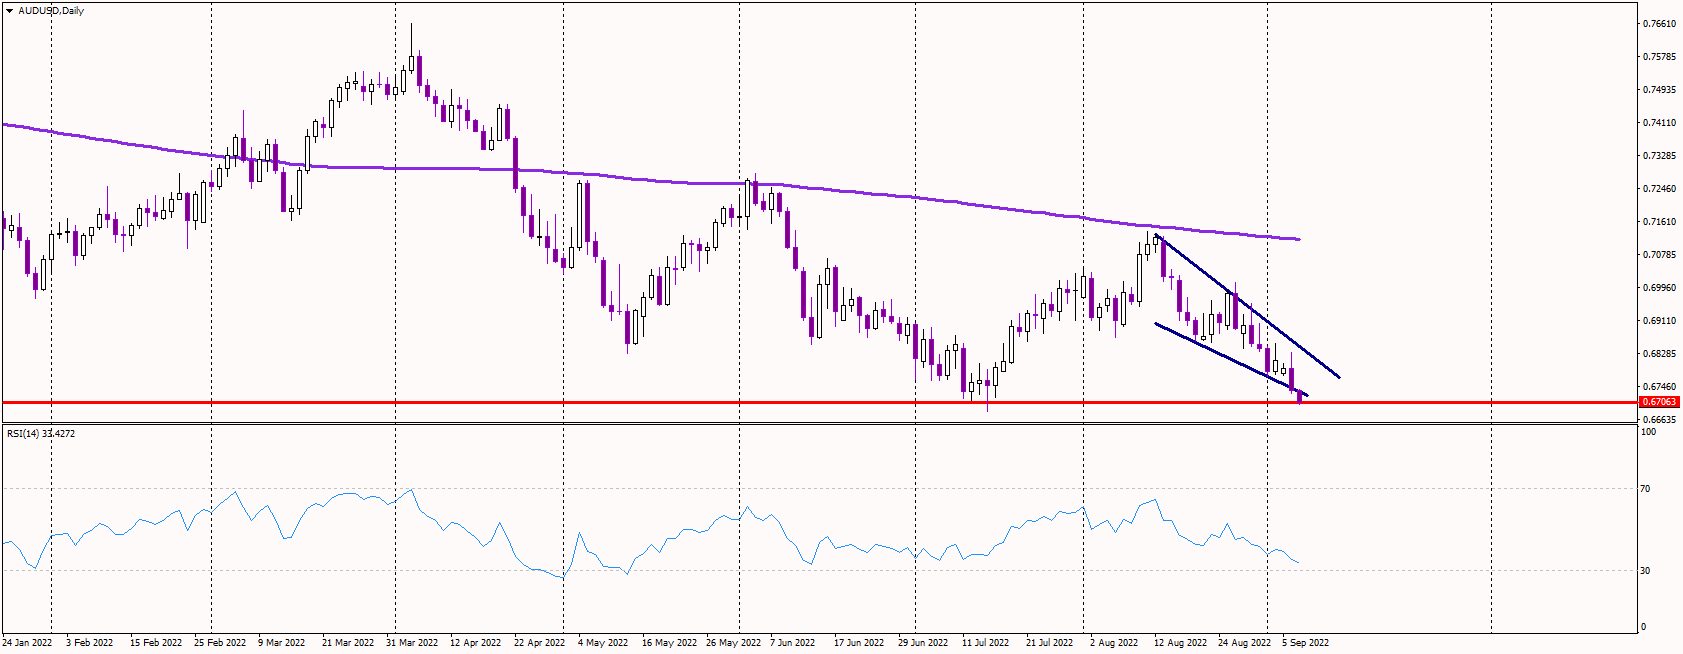 AUDUSD Tests Essential Support of Previous Lows